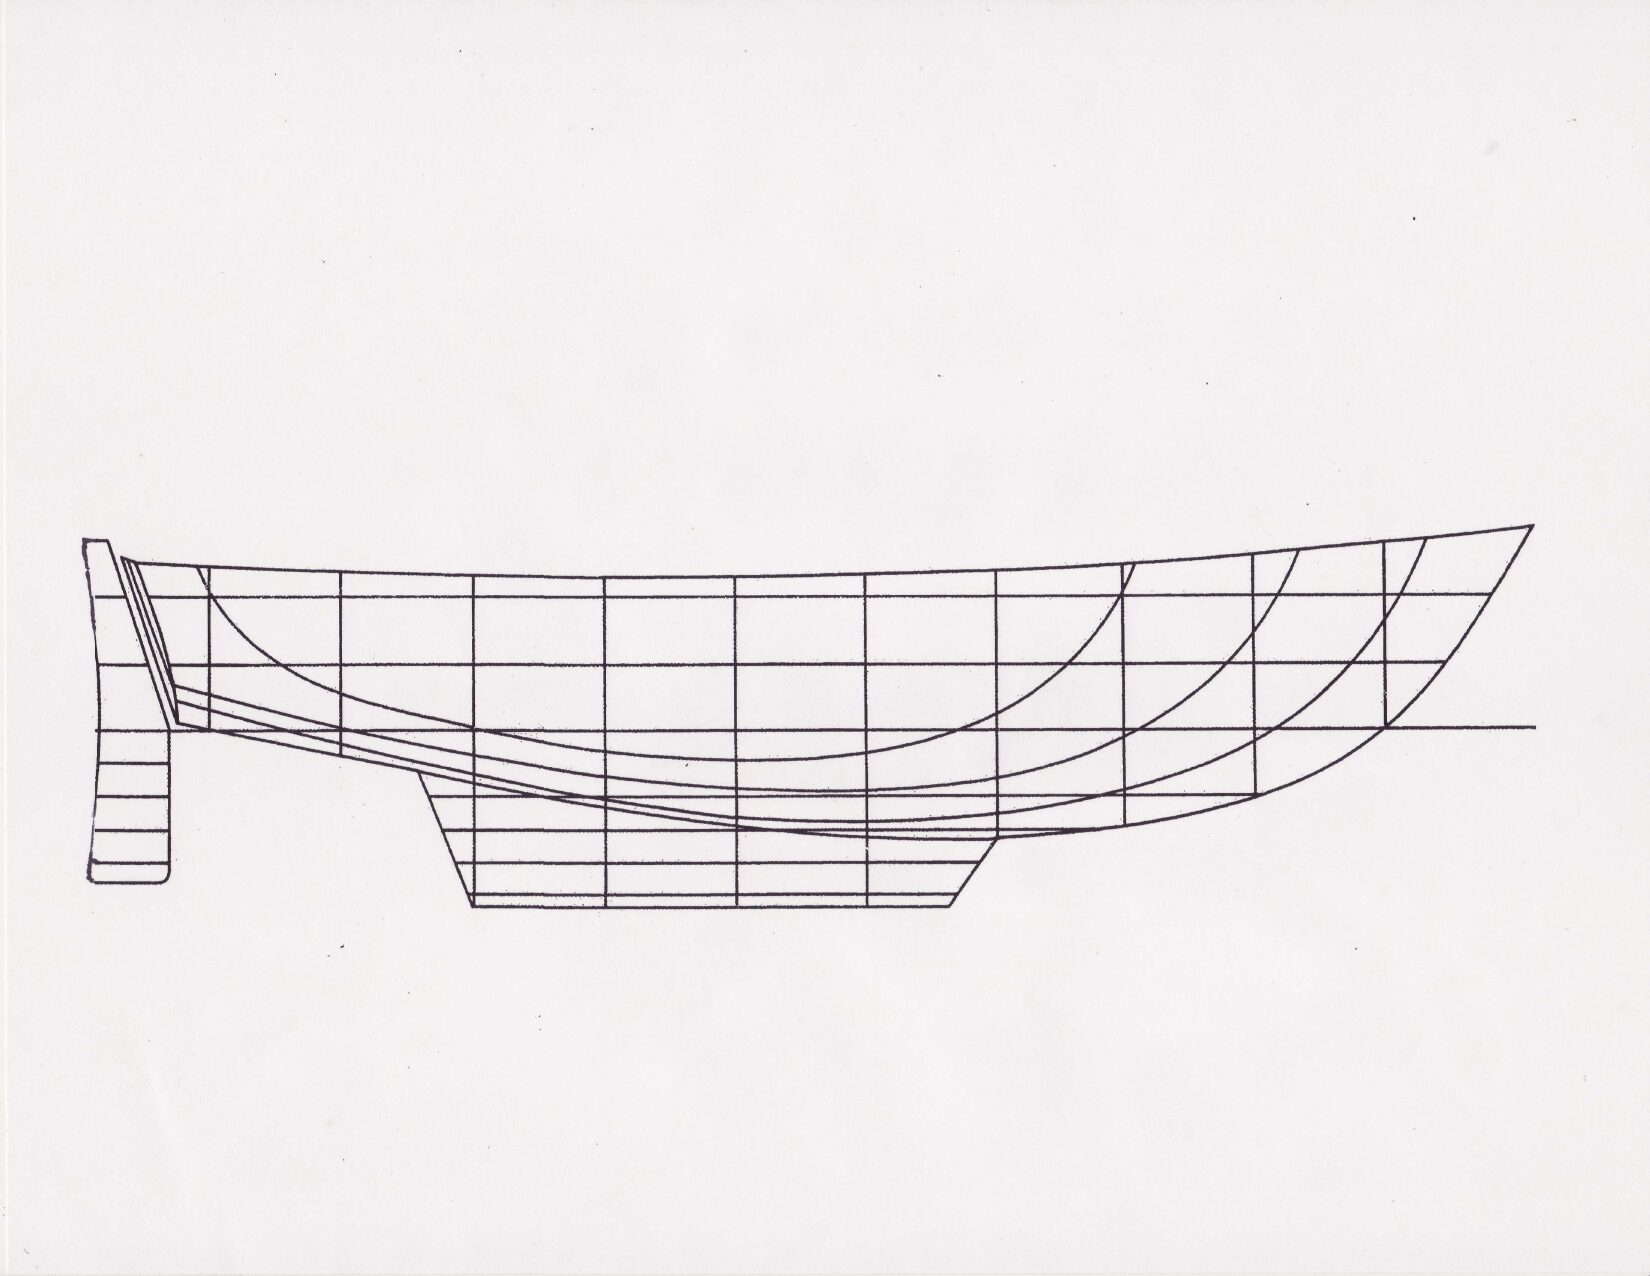 A drawing of a boat with a net on the bottom.